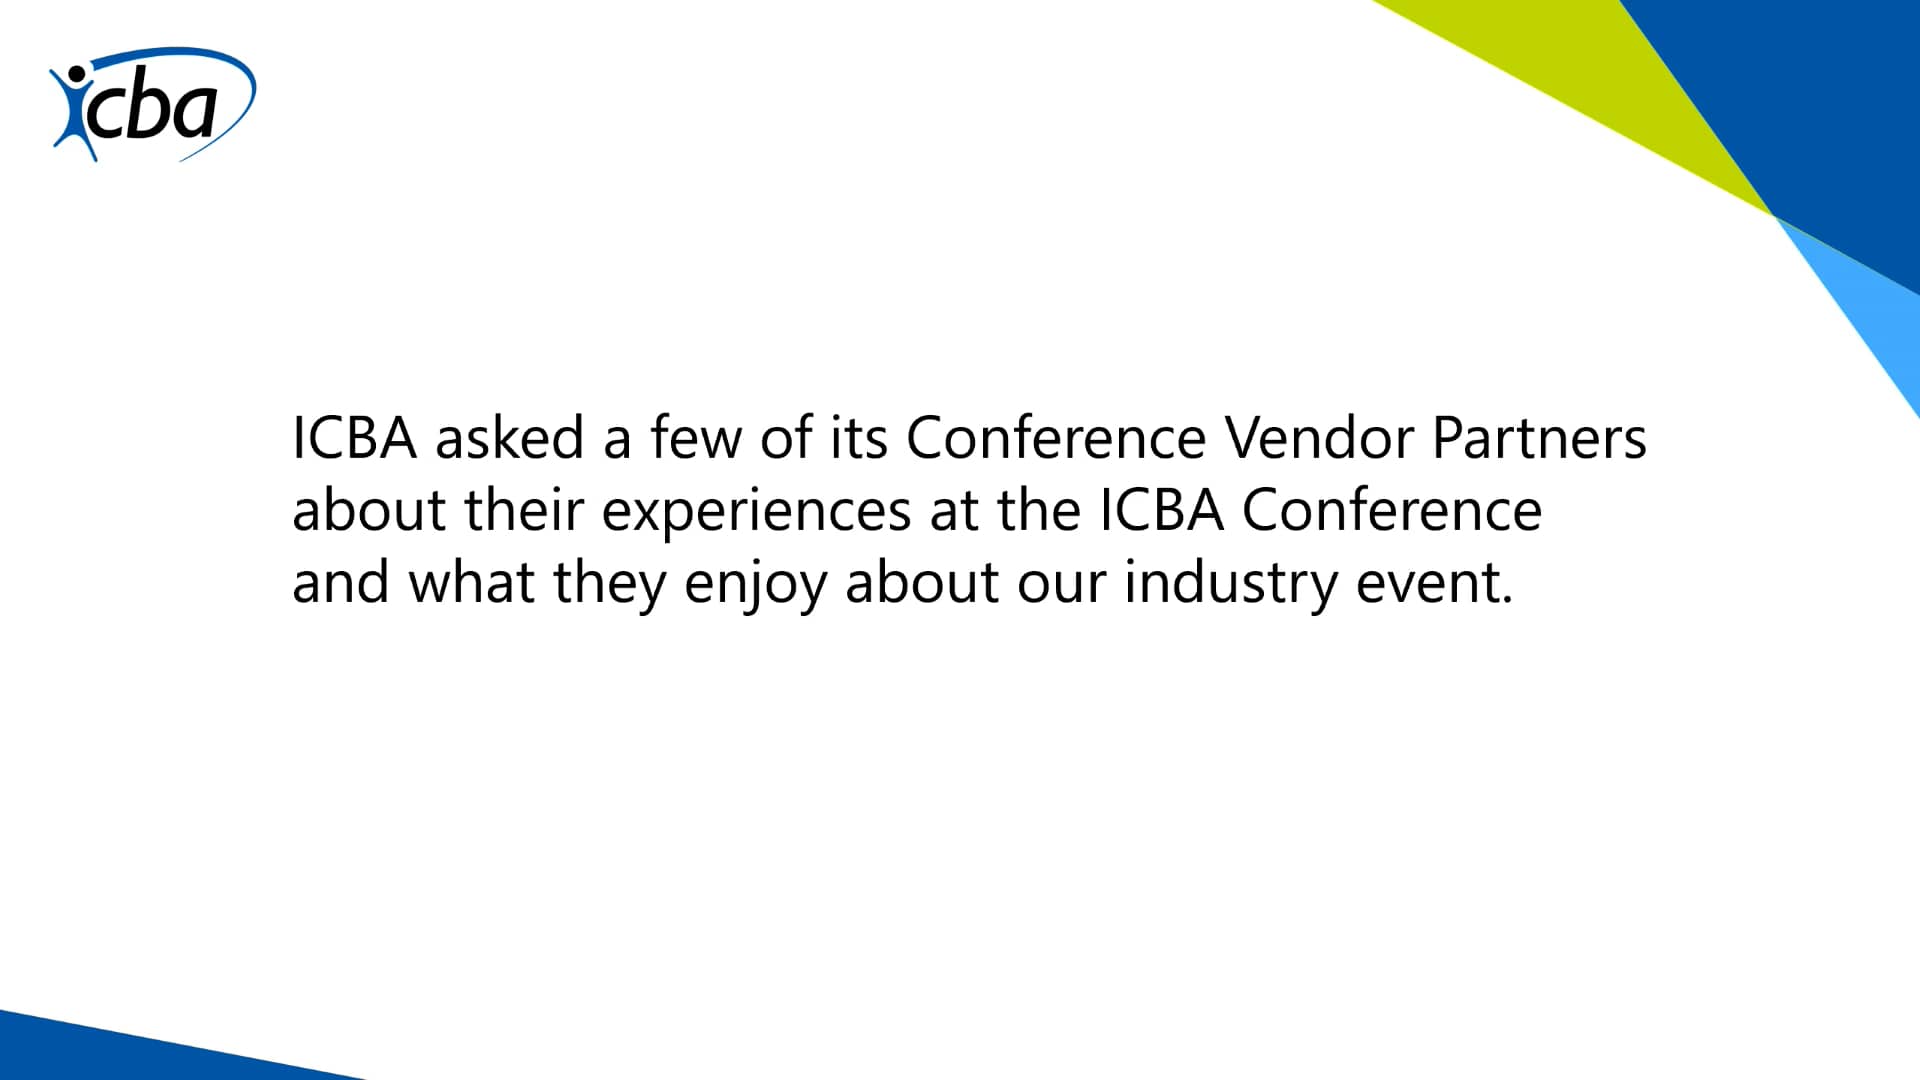 ICBA Conference Exhibitors on Value & Why They Attend the ICBA